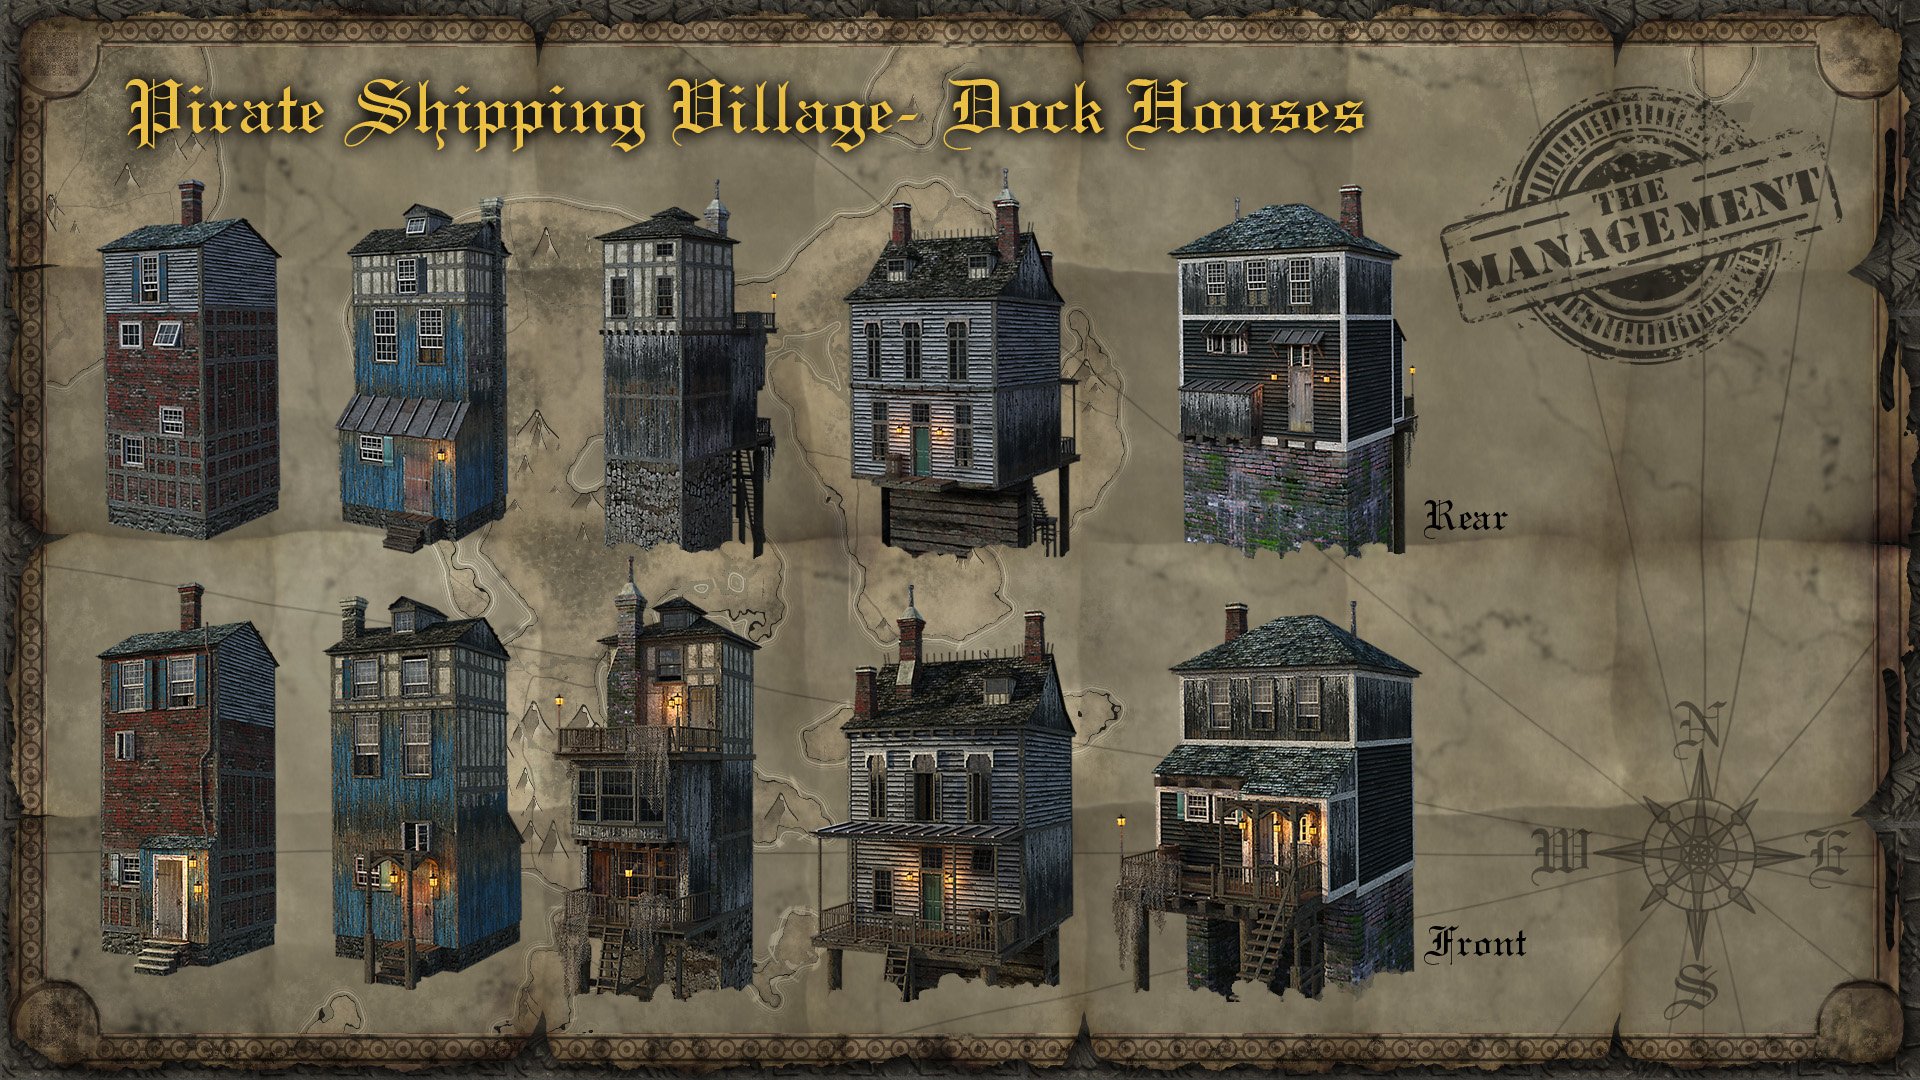 Pirate Shipping Village - Dock Houses by: The Management, 3D Models by Daz 3D